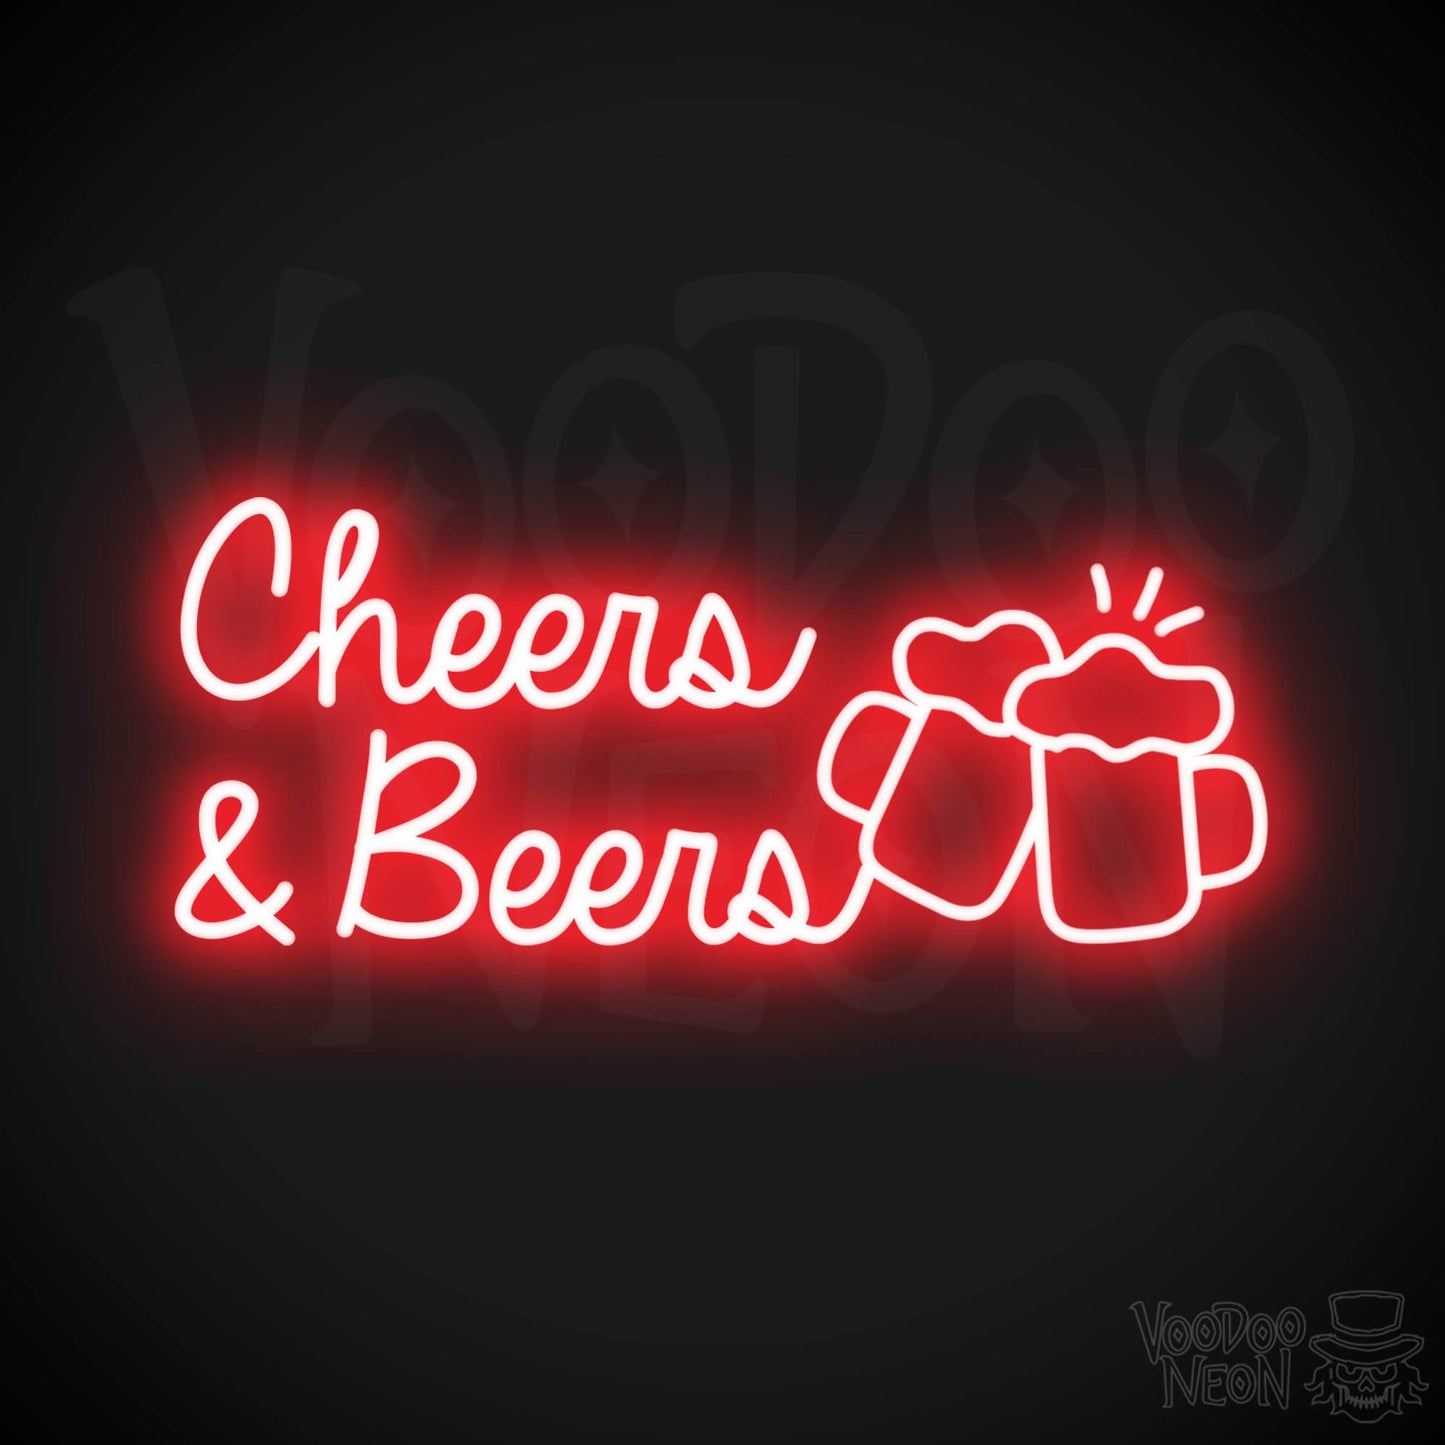 Cheers & Beers LED Neon - Red